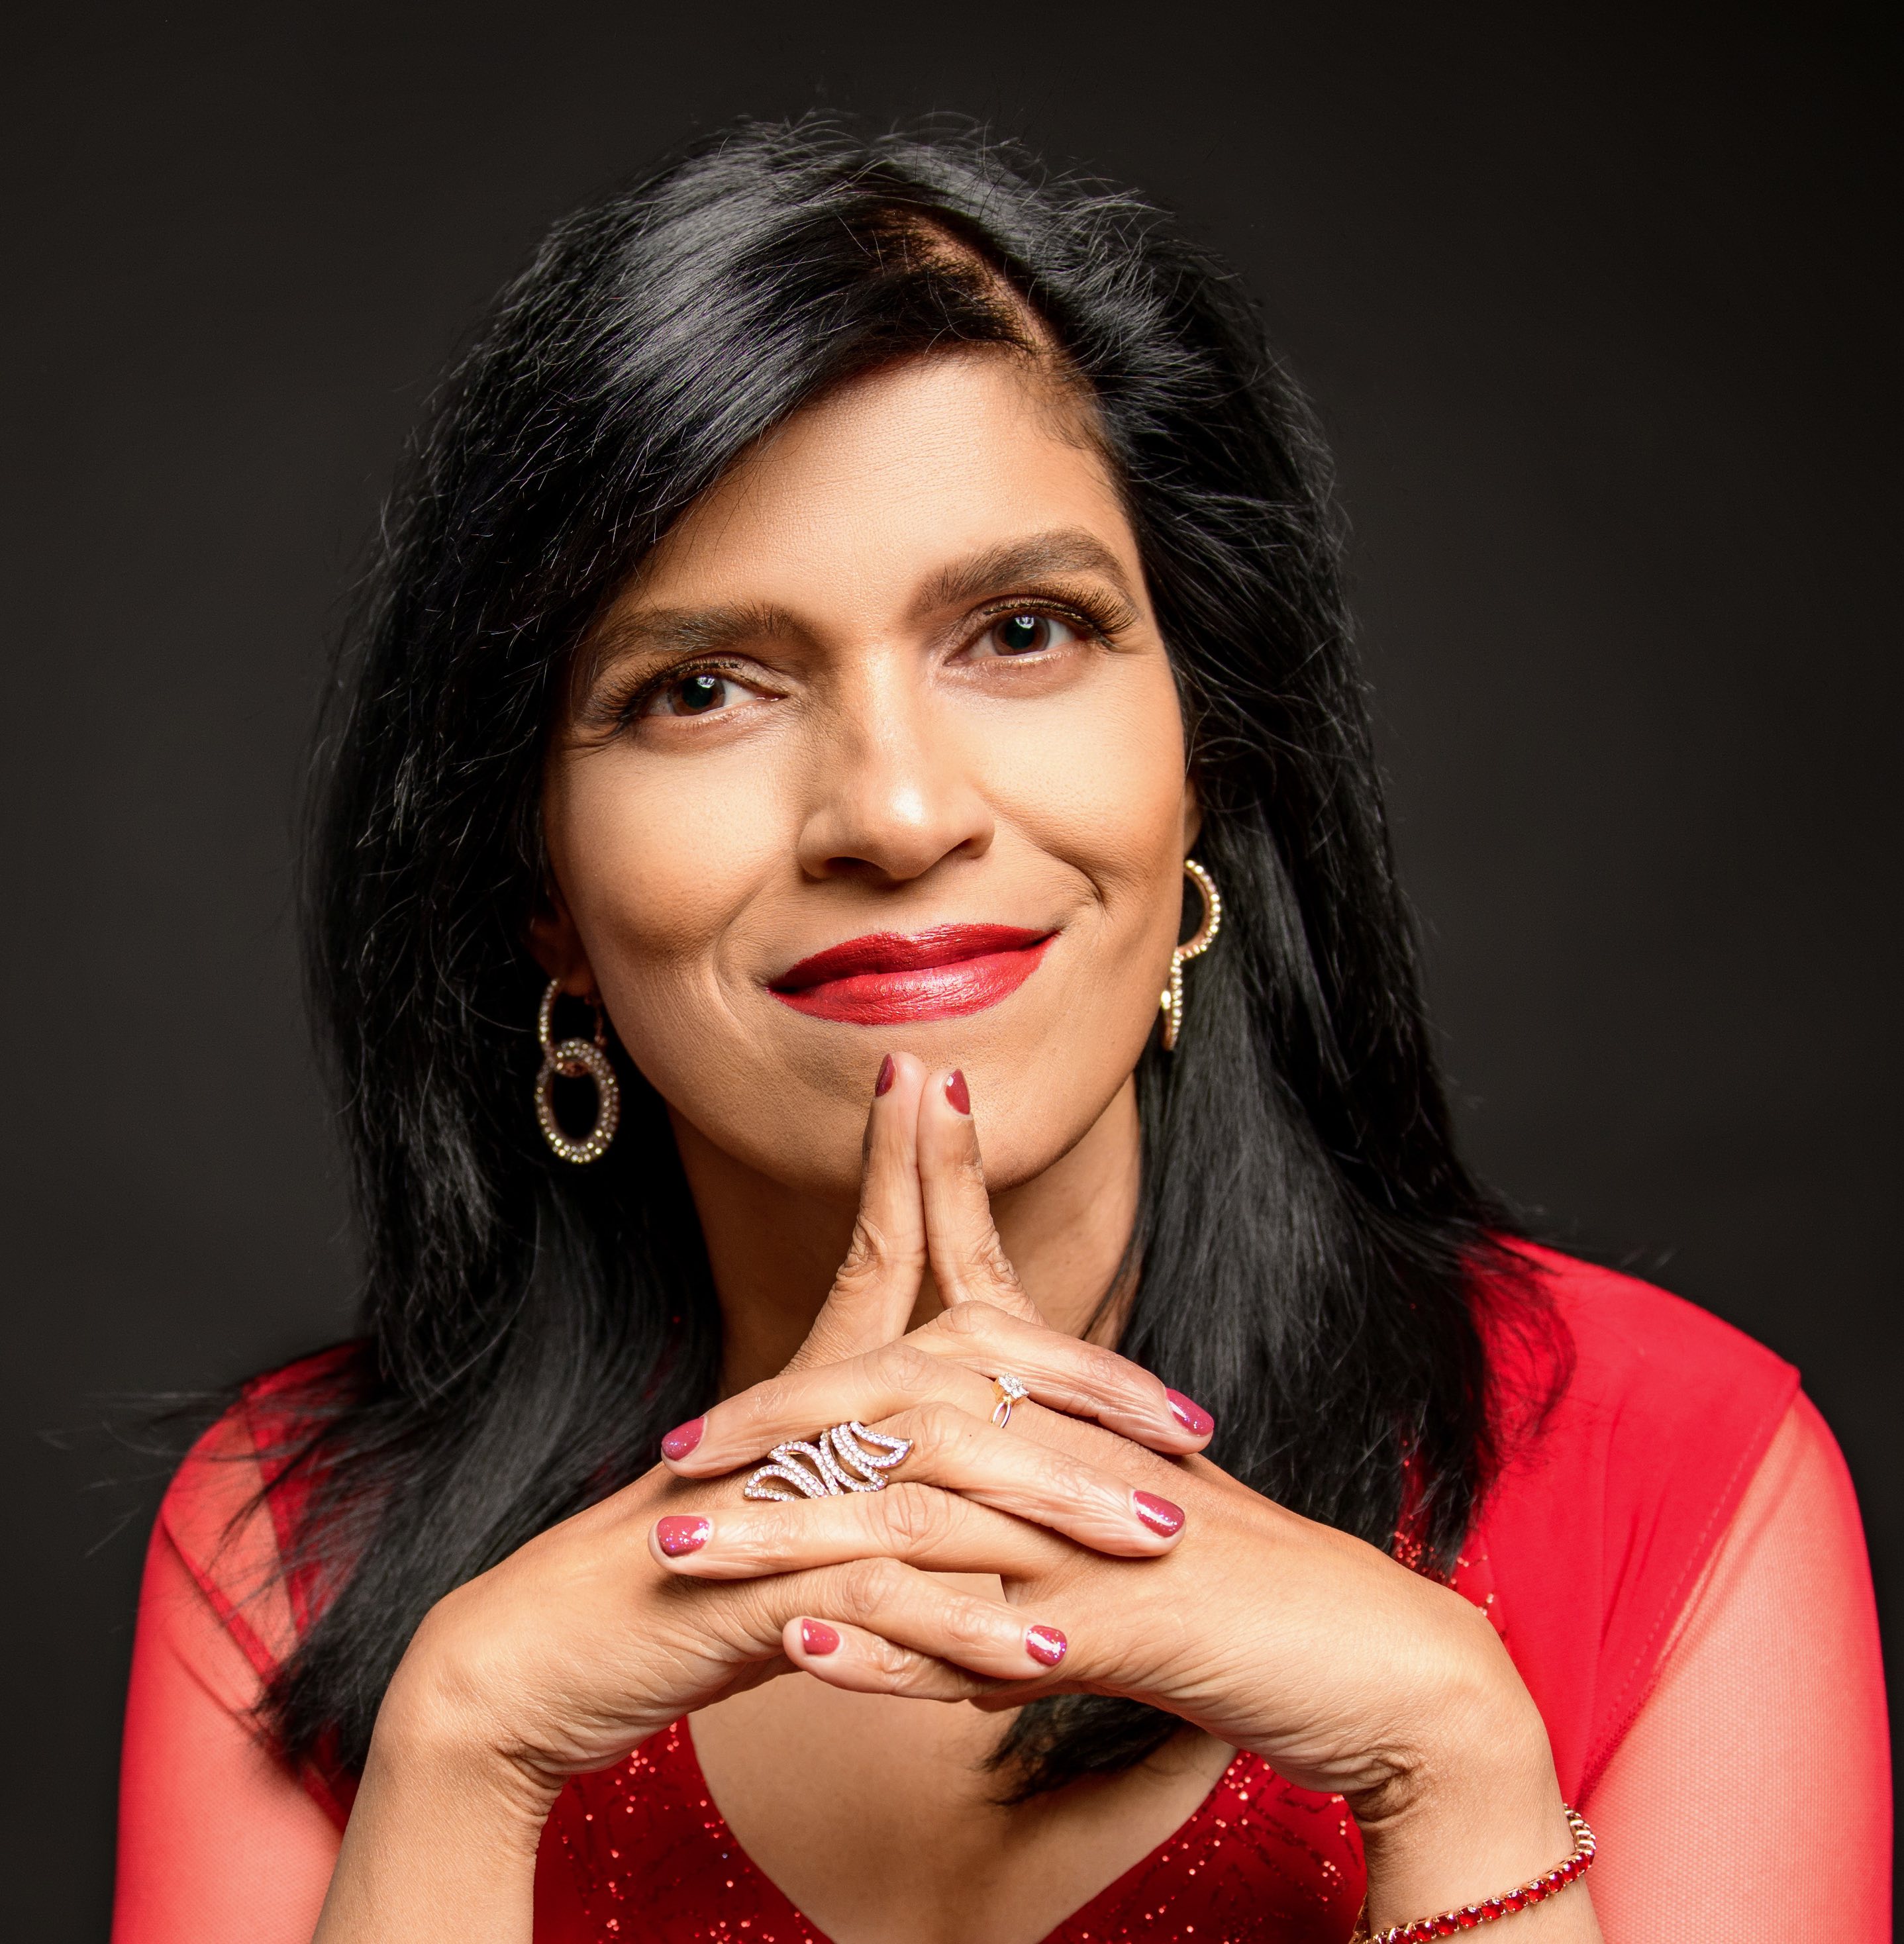 Beena Ammanath faces directly toward the camera wearing a red blouse and gold hoop earrings. She clasps her hands just beneath her chin.